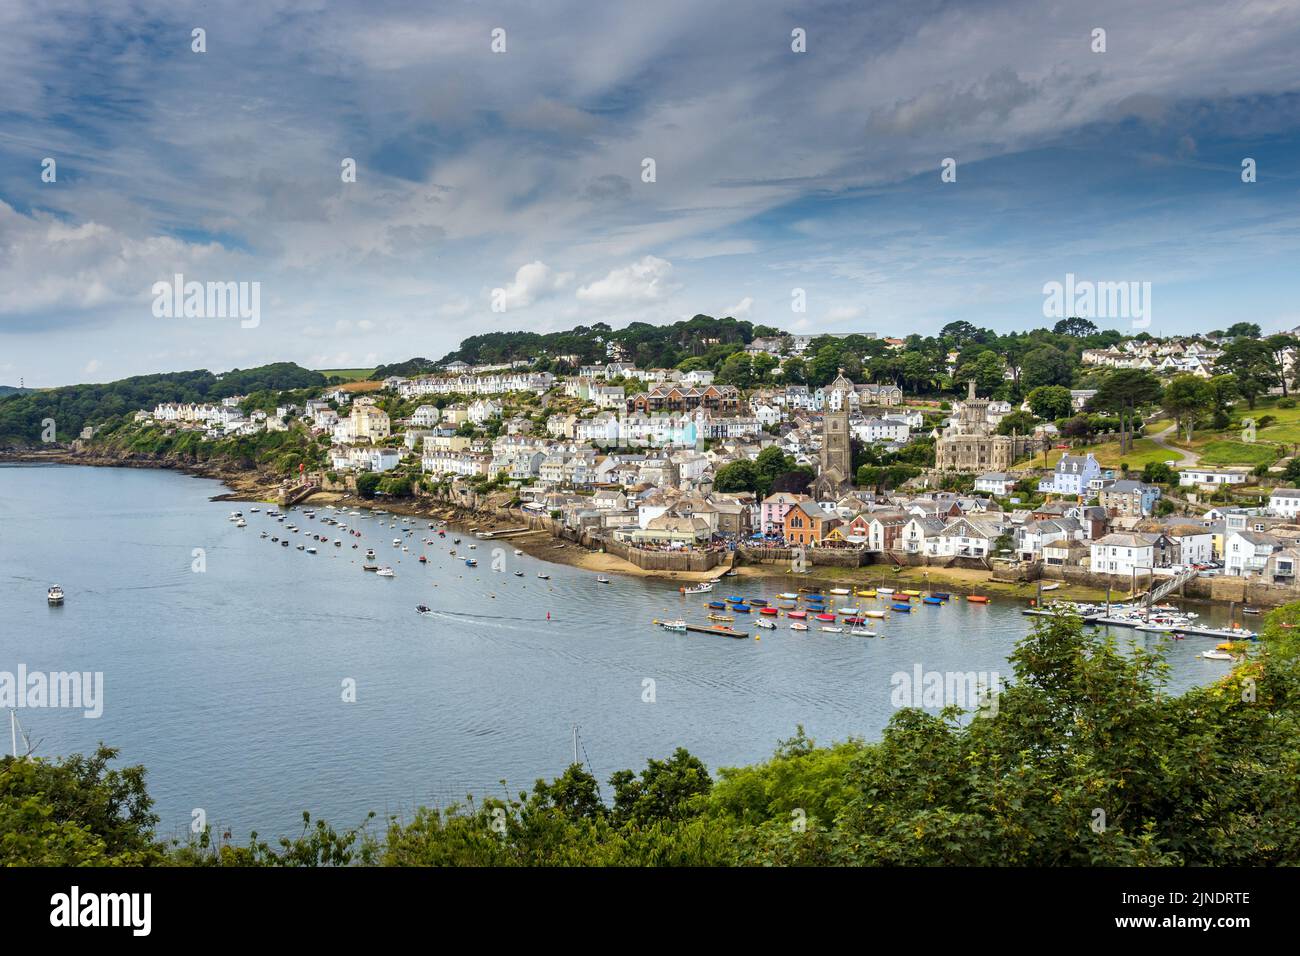 Elevated view of the picturesque town of Fowey and its harbour on the River Fowey estuary in Cornwall. Stock Photo